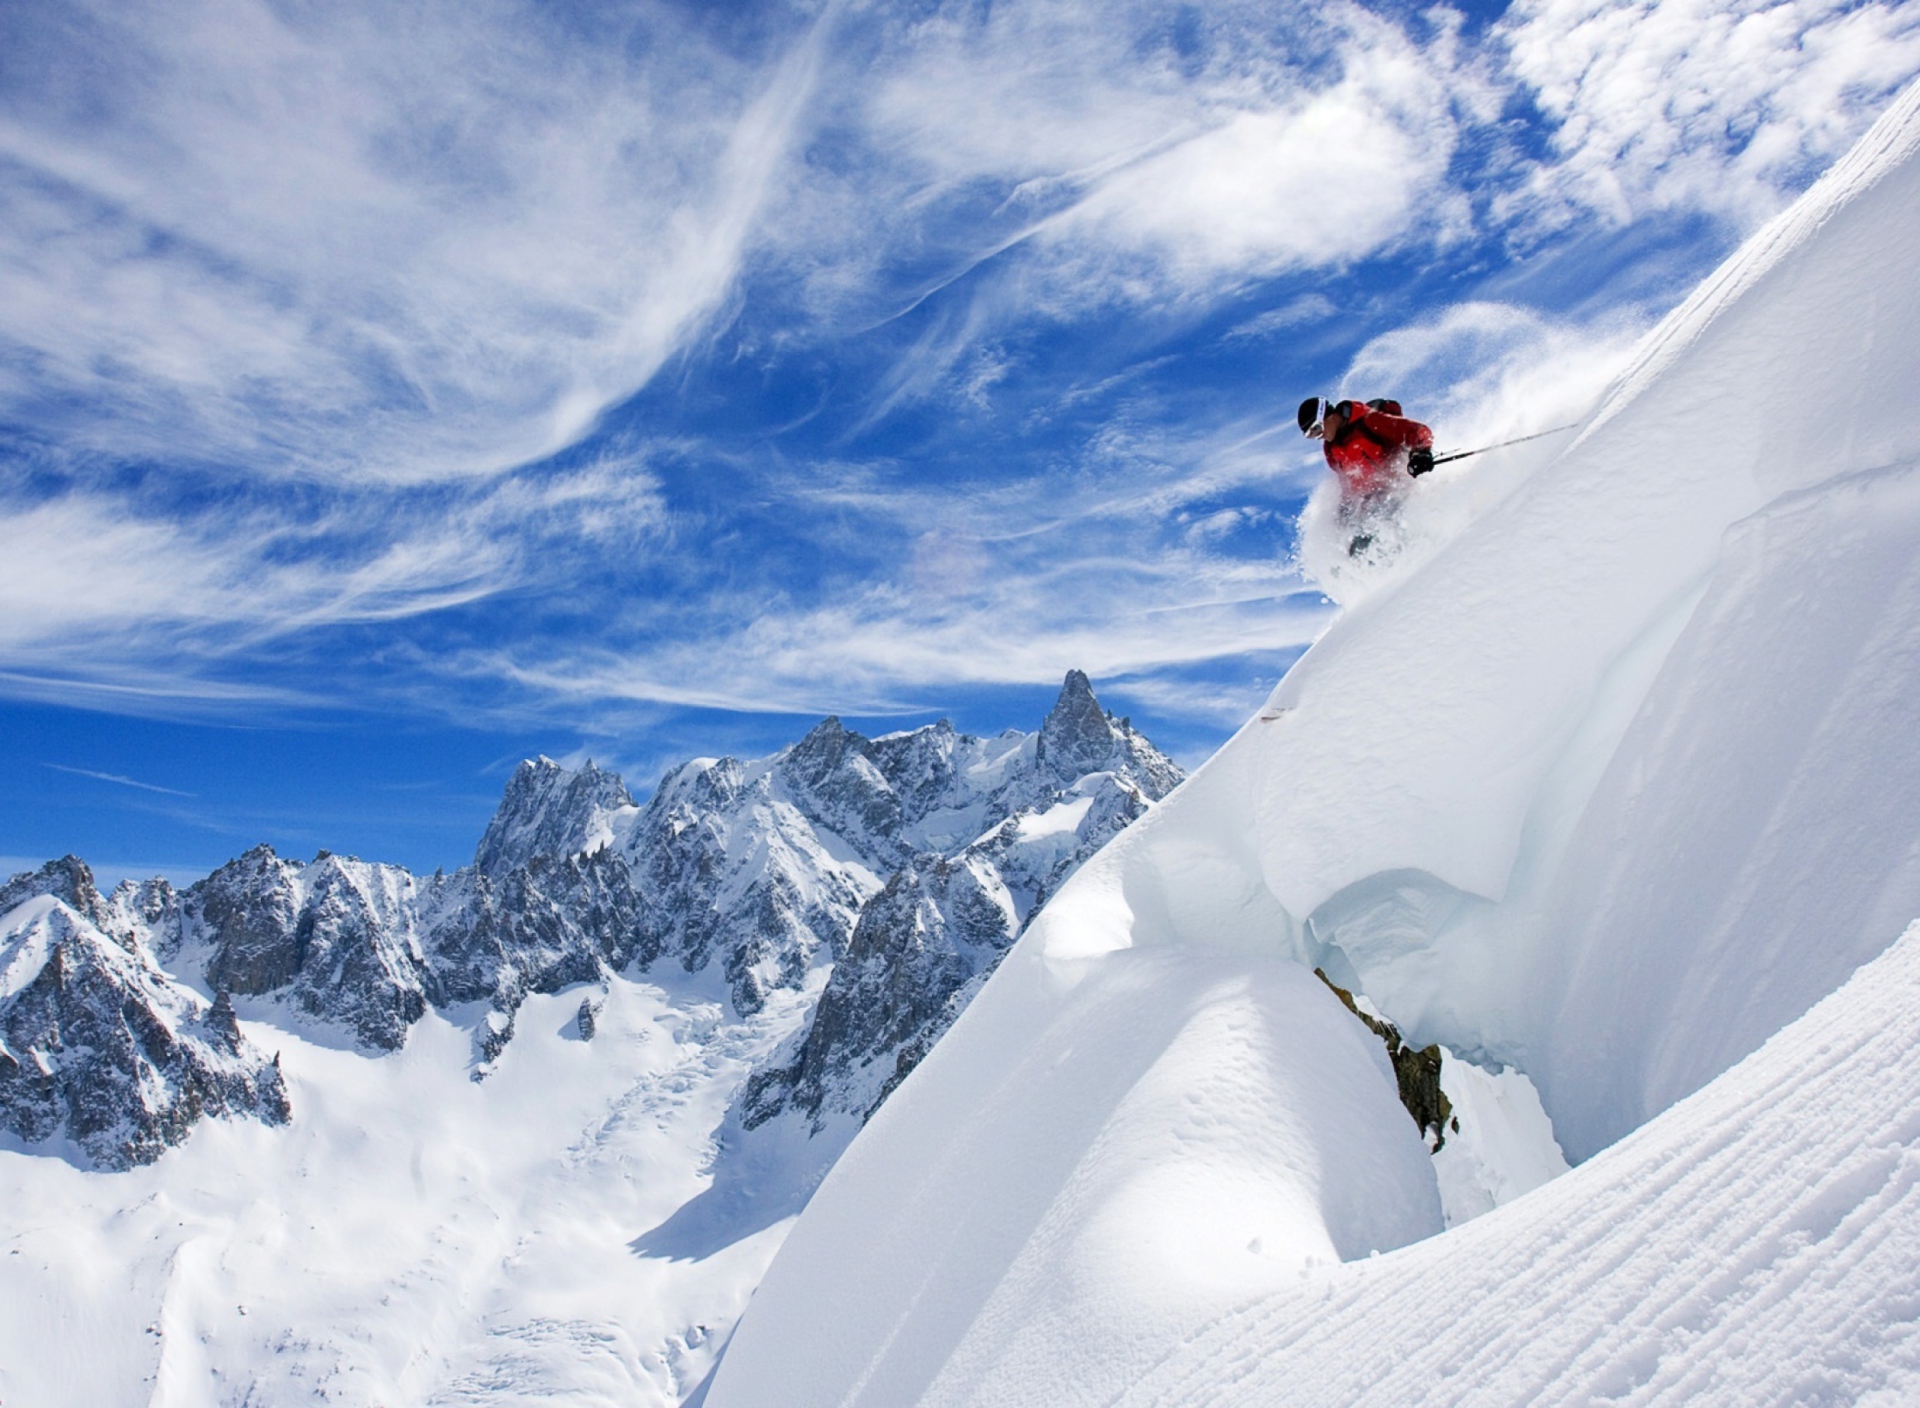 Skiing In France wallpaper 1920x1408